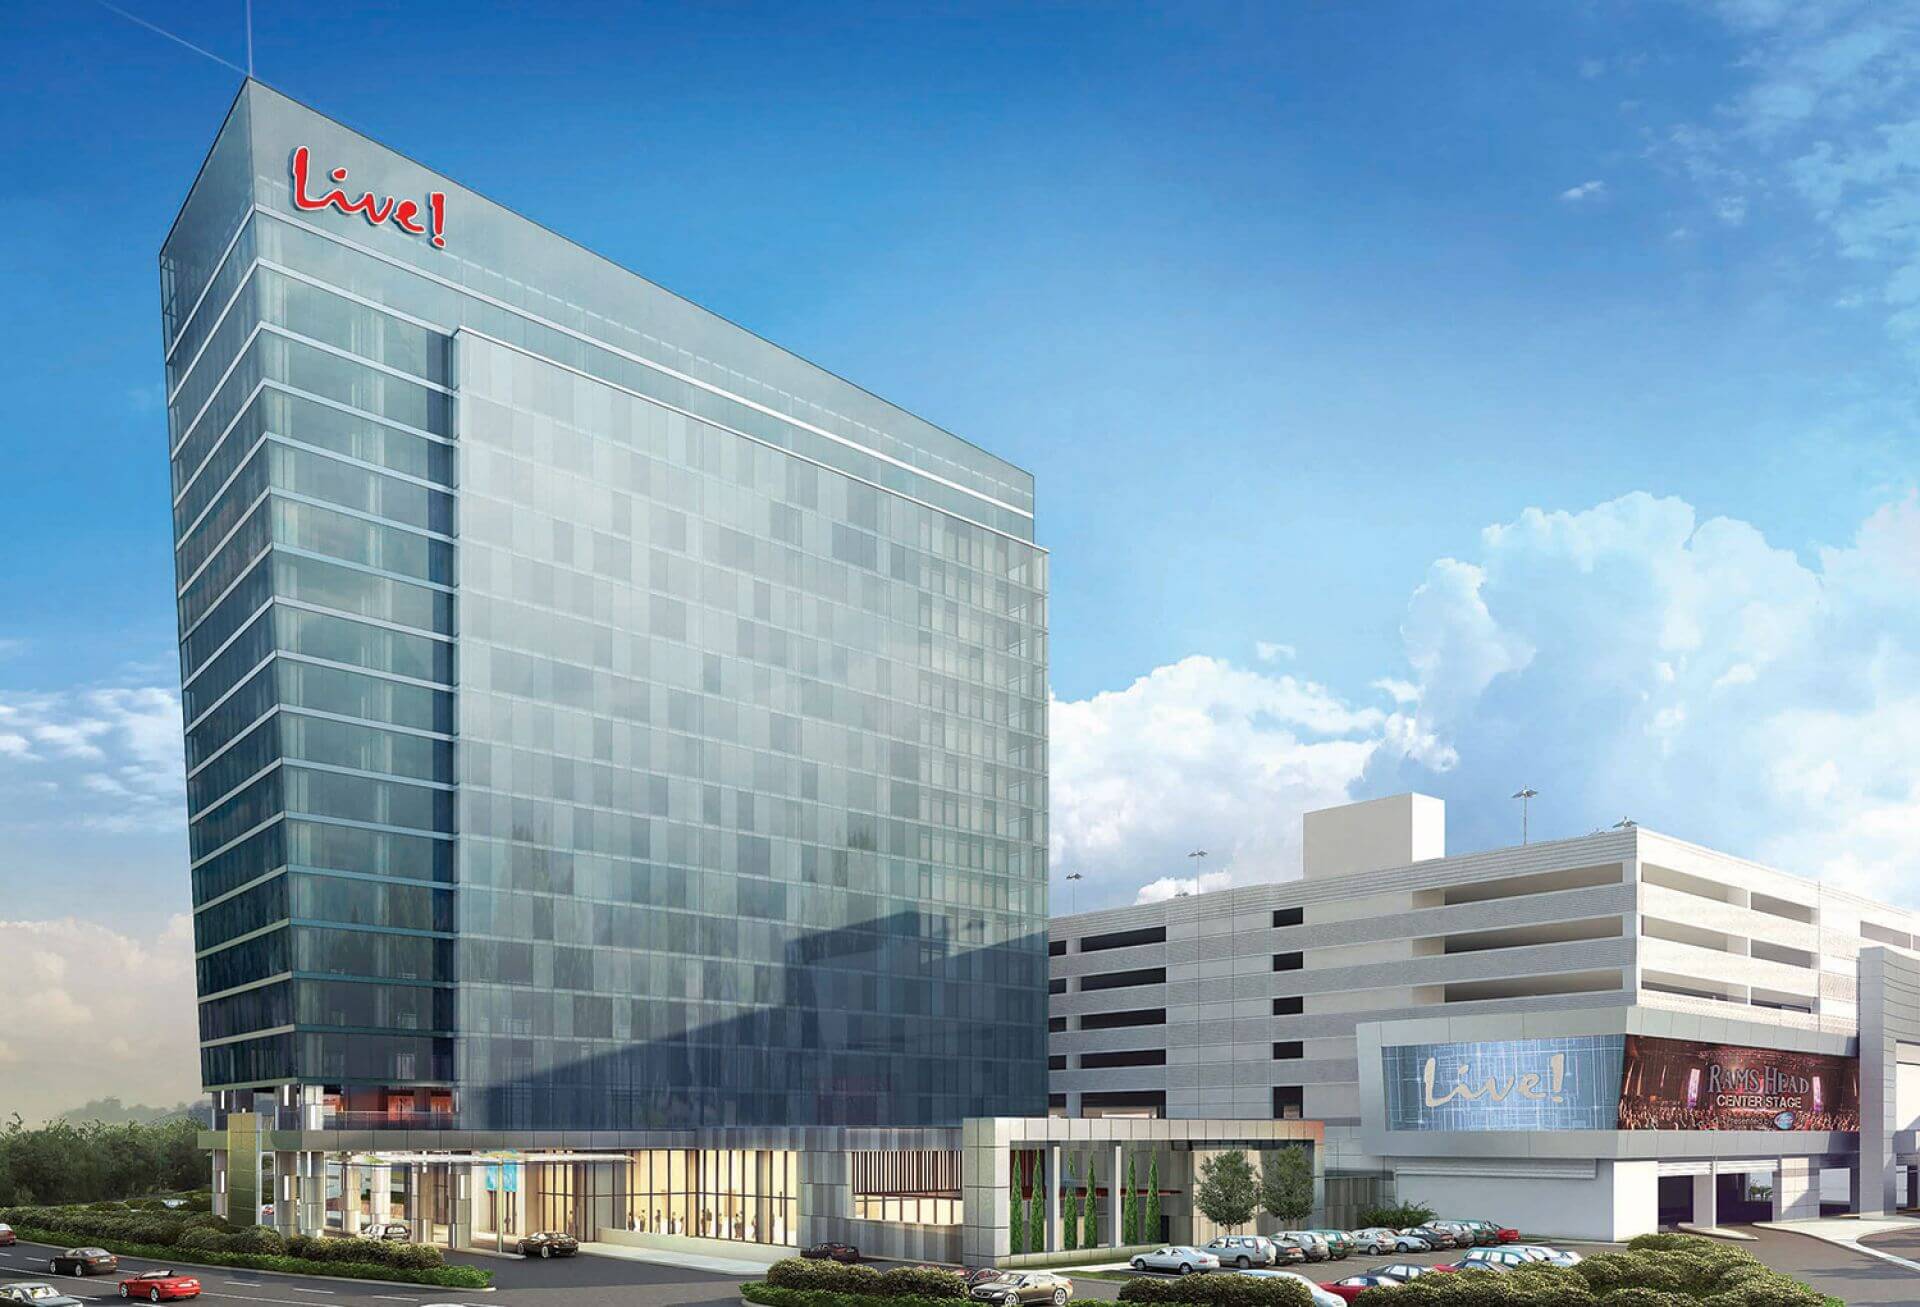 Live Casino  Hotel Maryland implements revenue strategy solutions